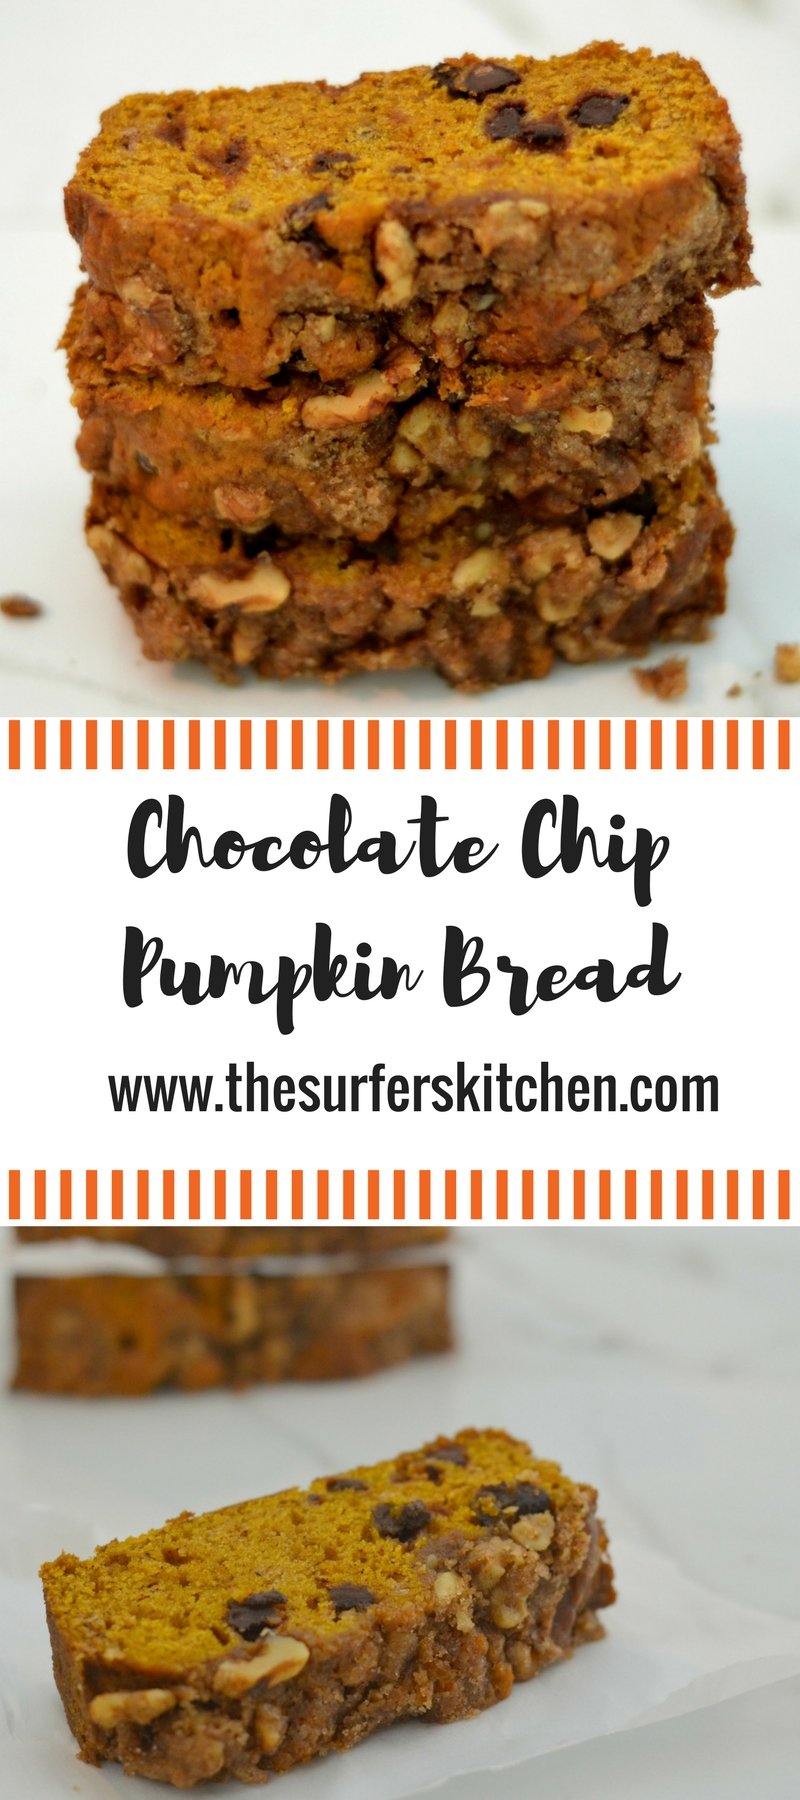 Chocolate Chip Pumpkin Bread| My basic pumpkin bread recipe with added chocolate and a special topping. So good! | www.thesurferskitchen.com